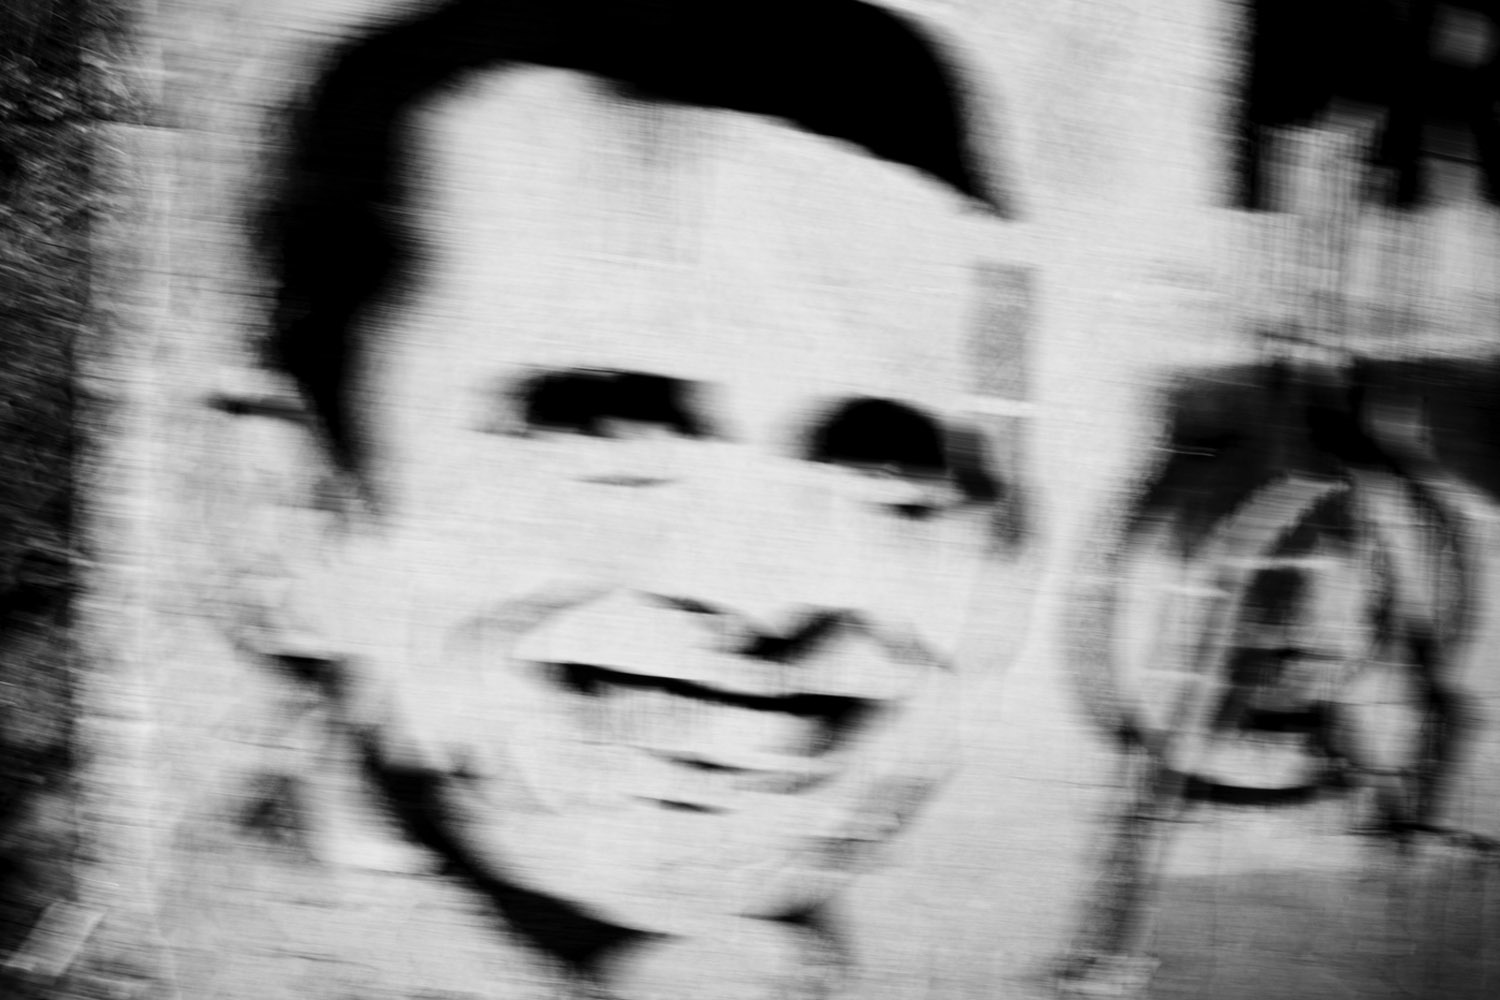 A stencil depicting Henrique Capriles Radonski, the presidential candidate for the opposition party.  Political graffiti covers much of the city, serving as a constant reminder of the nation's political tensions.